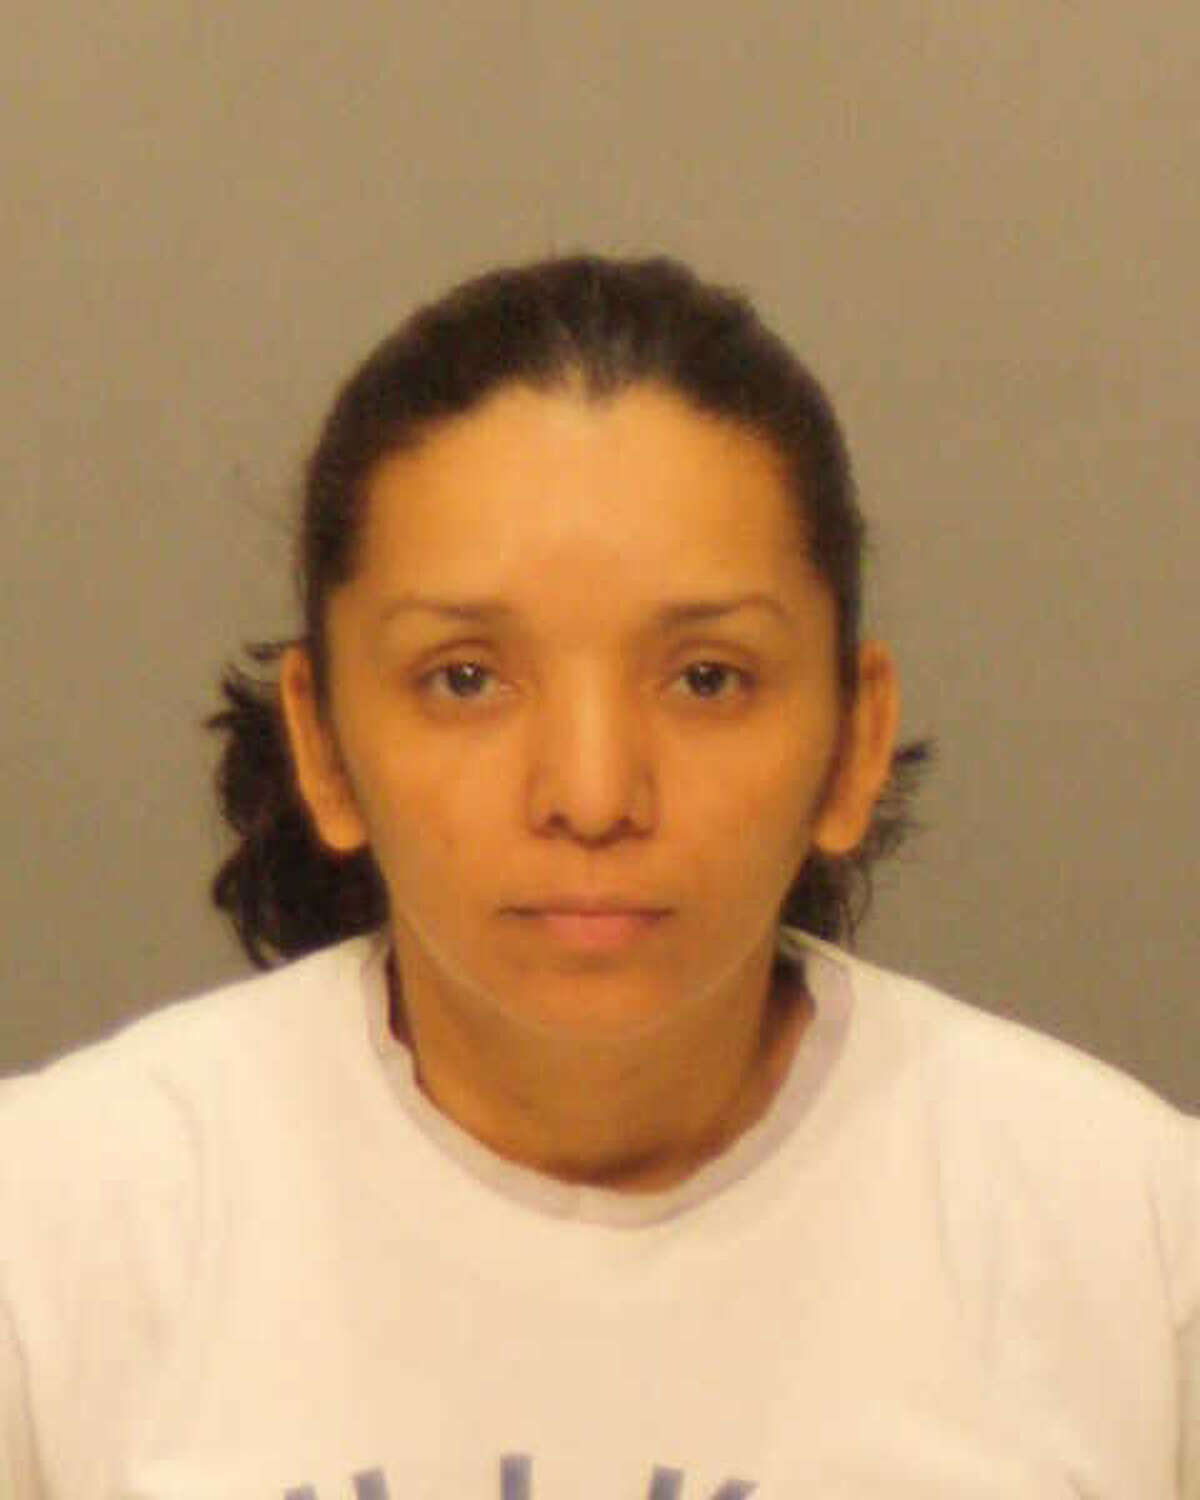 Albertina M. Romero, of Norwalk, was charged Monday, April 23, 2012, with third-degree forgery. Photo provided by Greenwich Police.